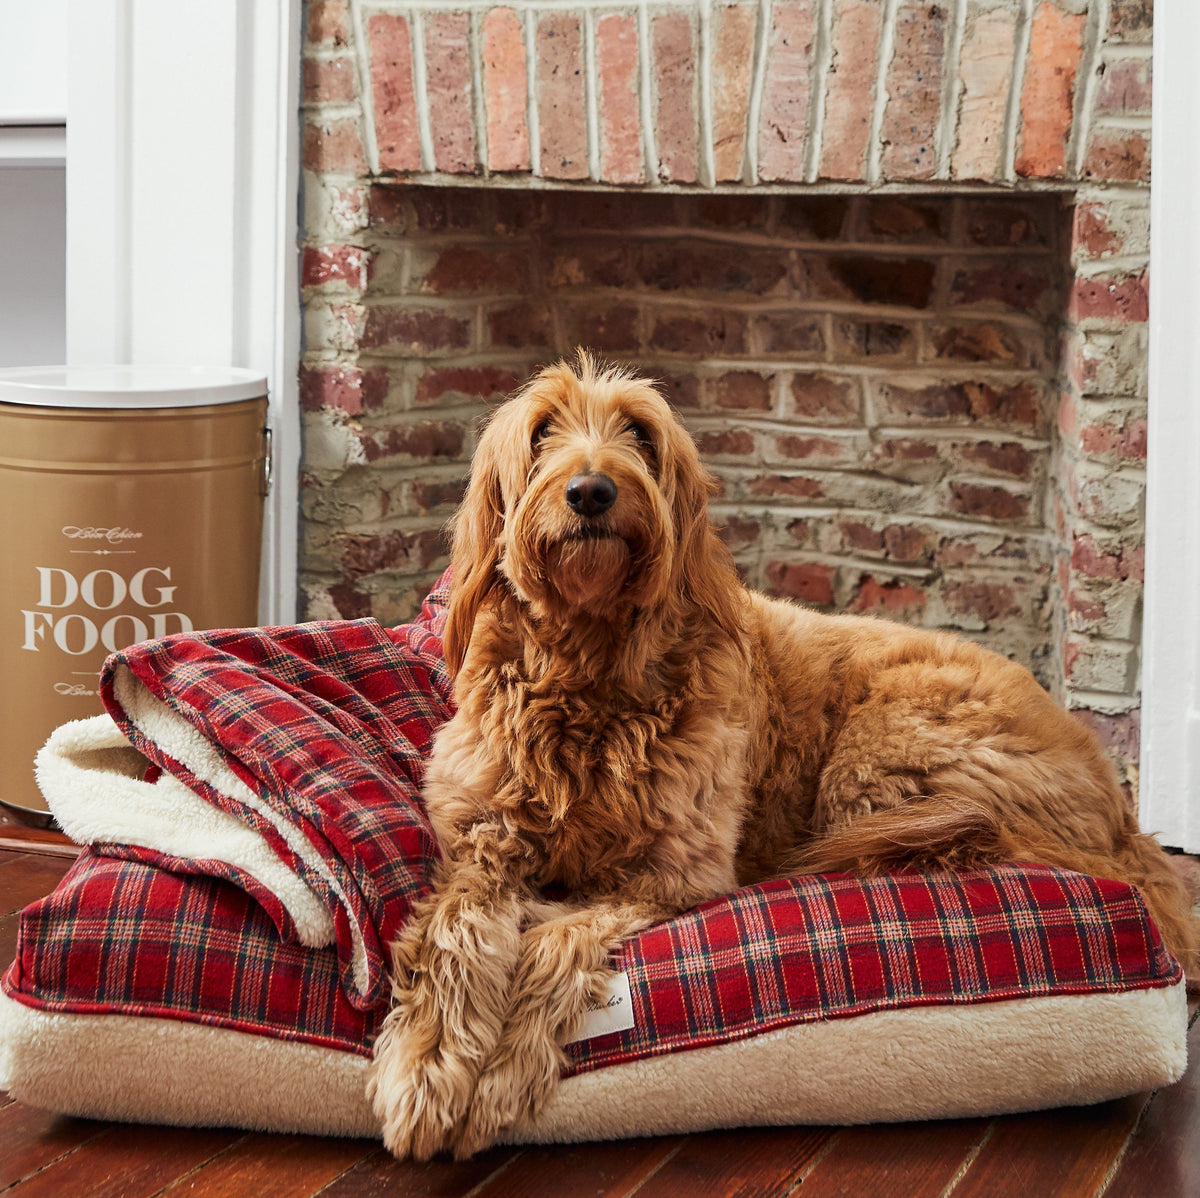 Bed Cover - Plaid Sherpa Rectangle Dog Bed Cover